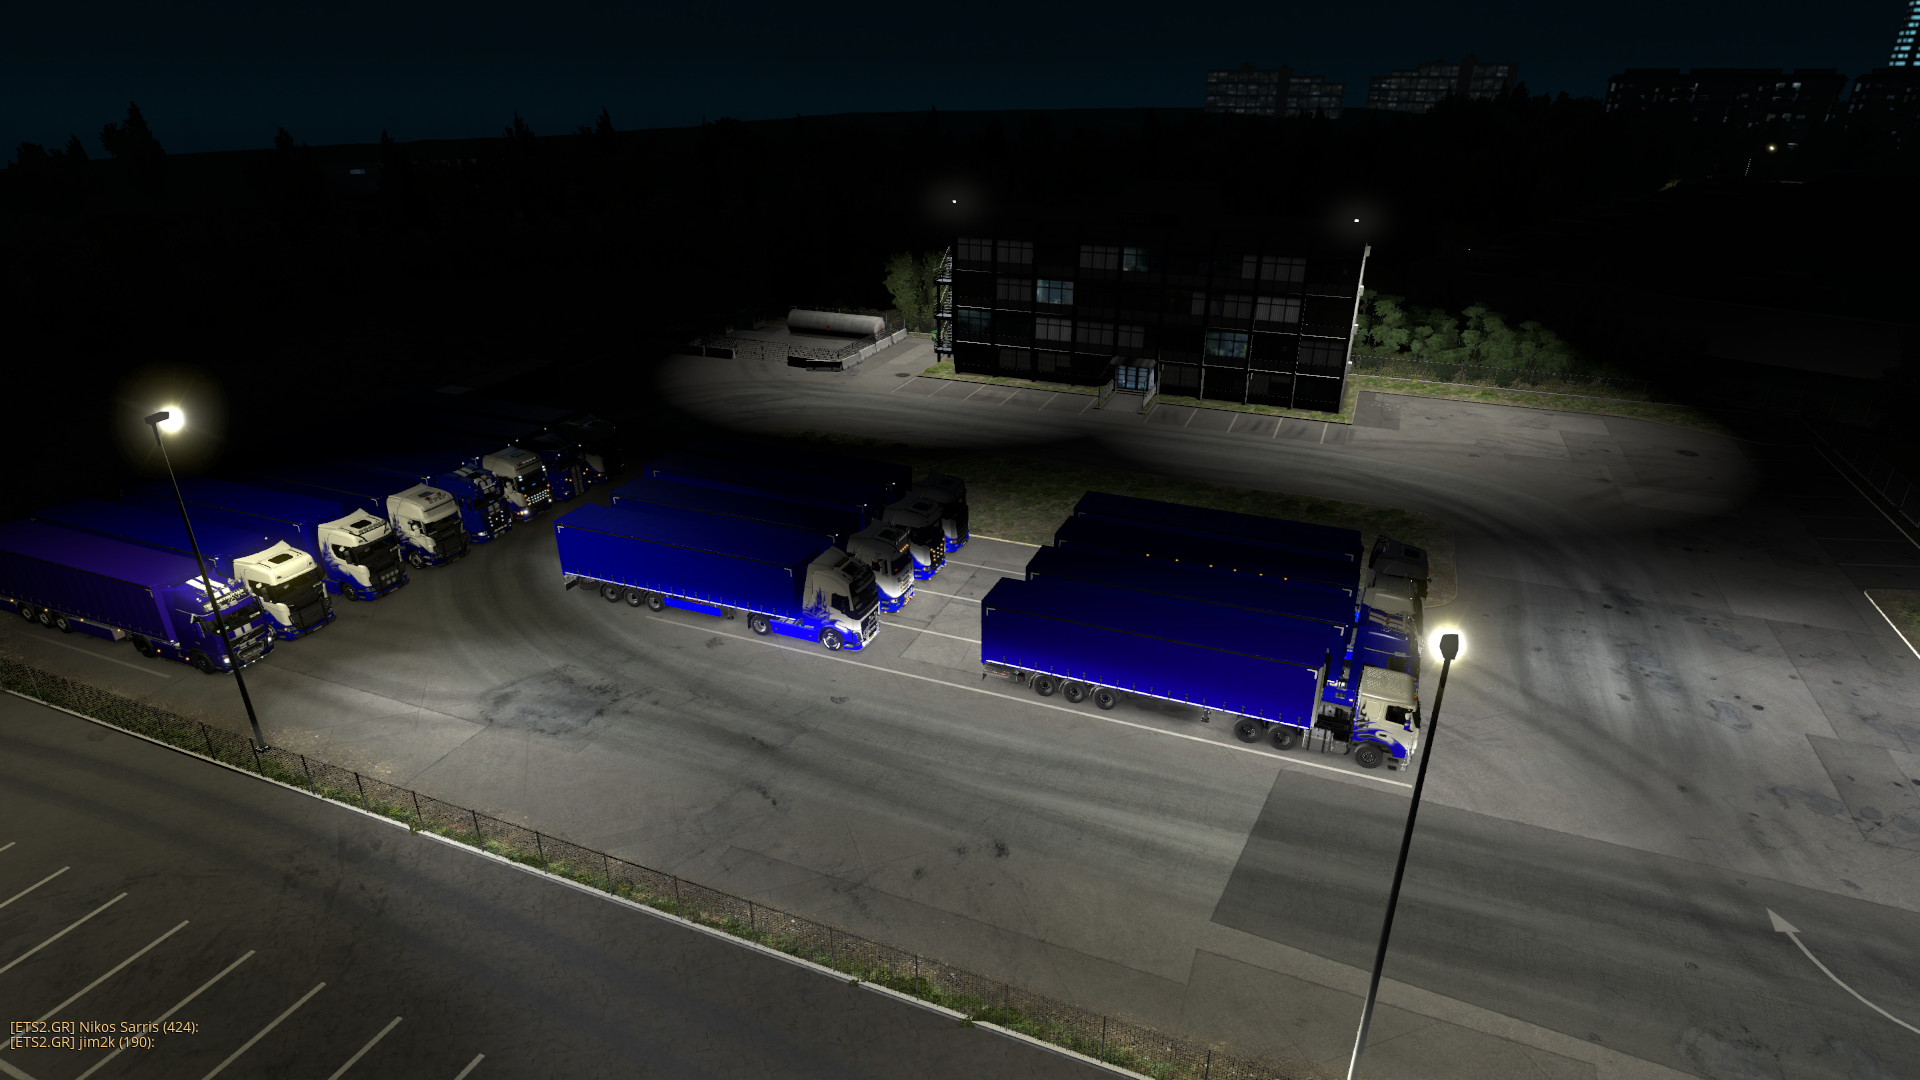 ets2_20190412_221738_00.png